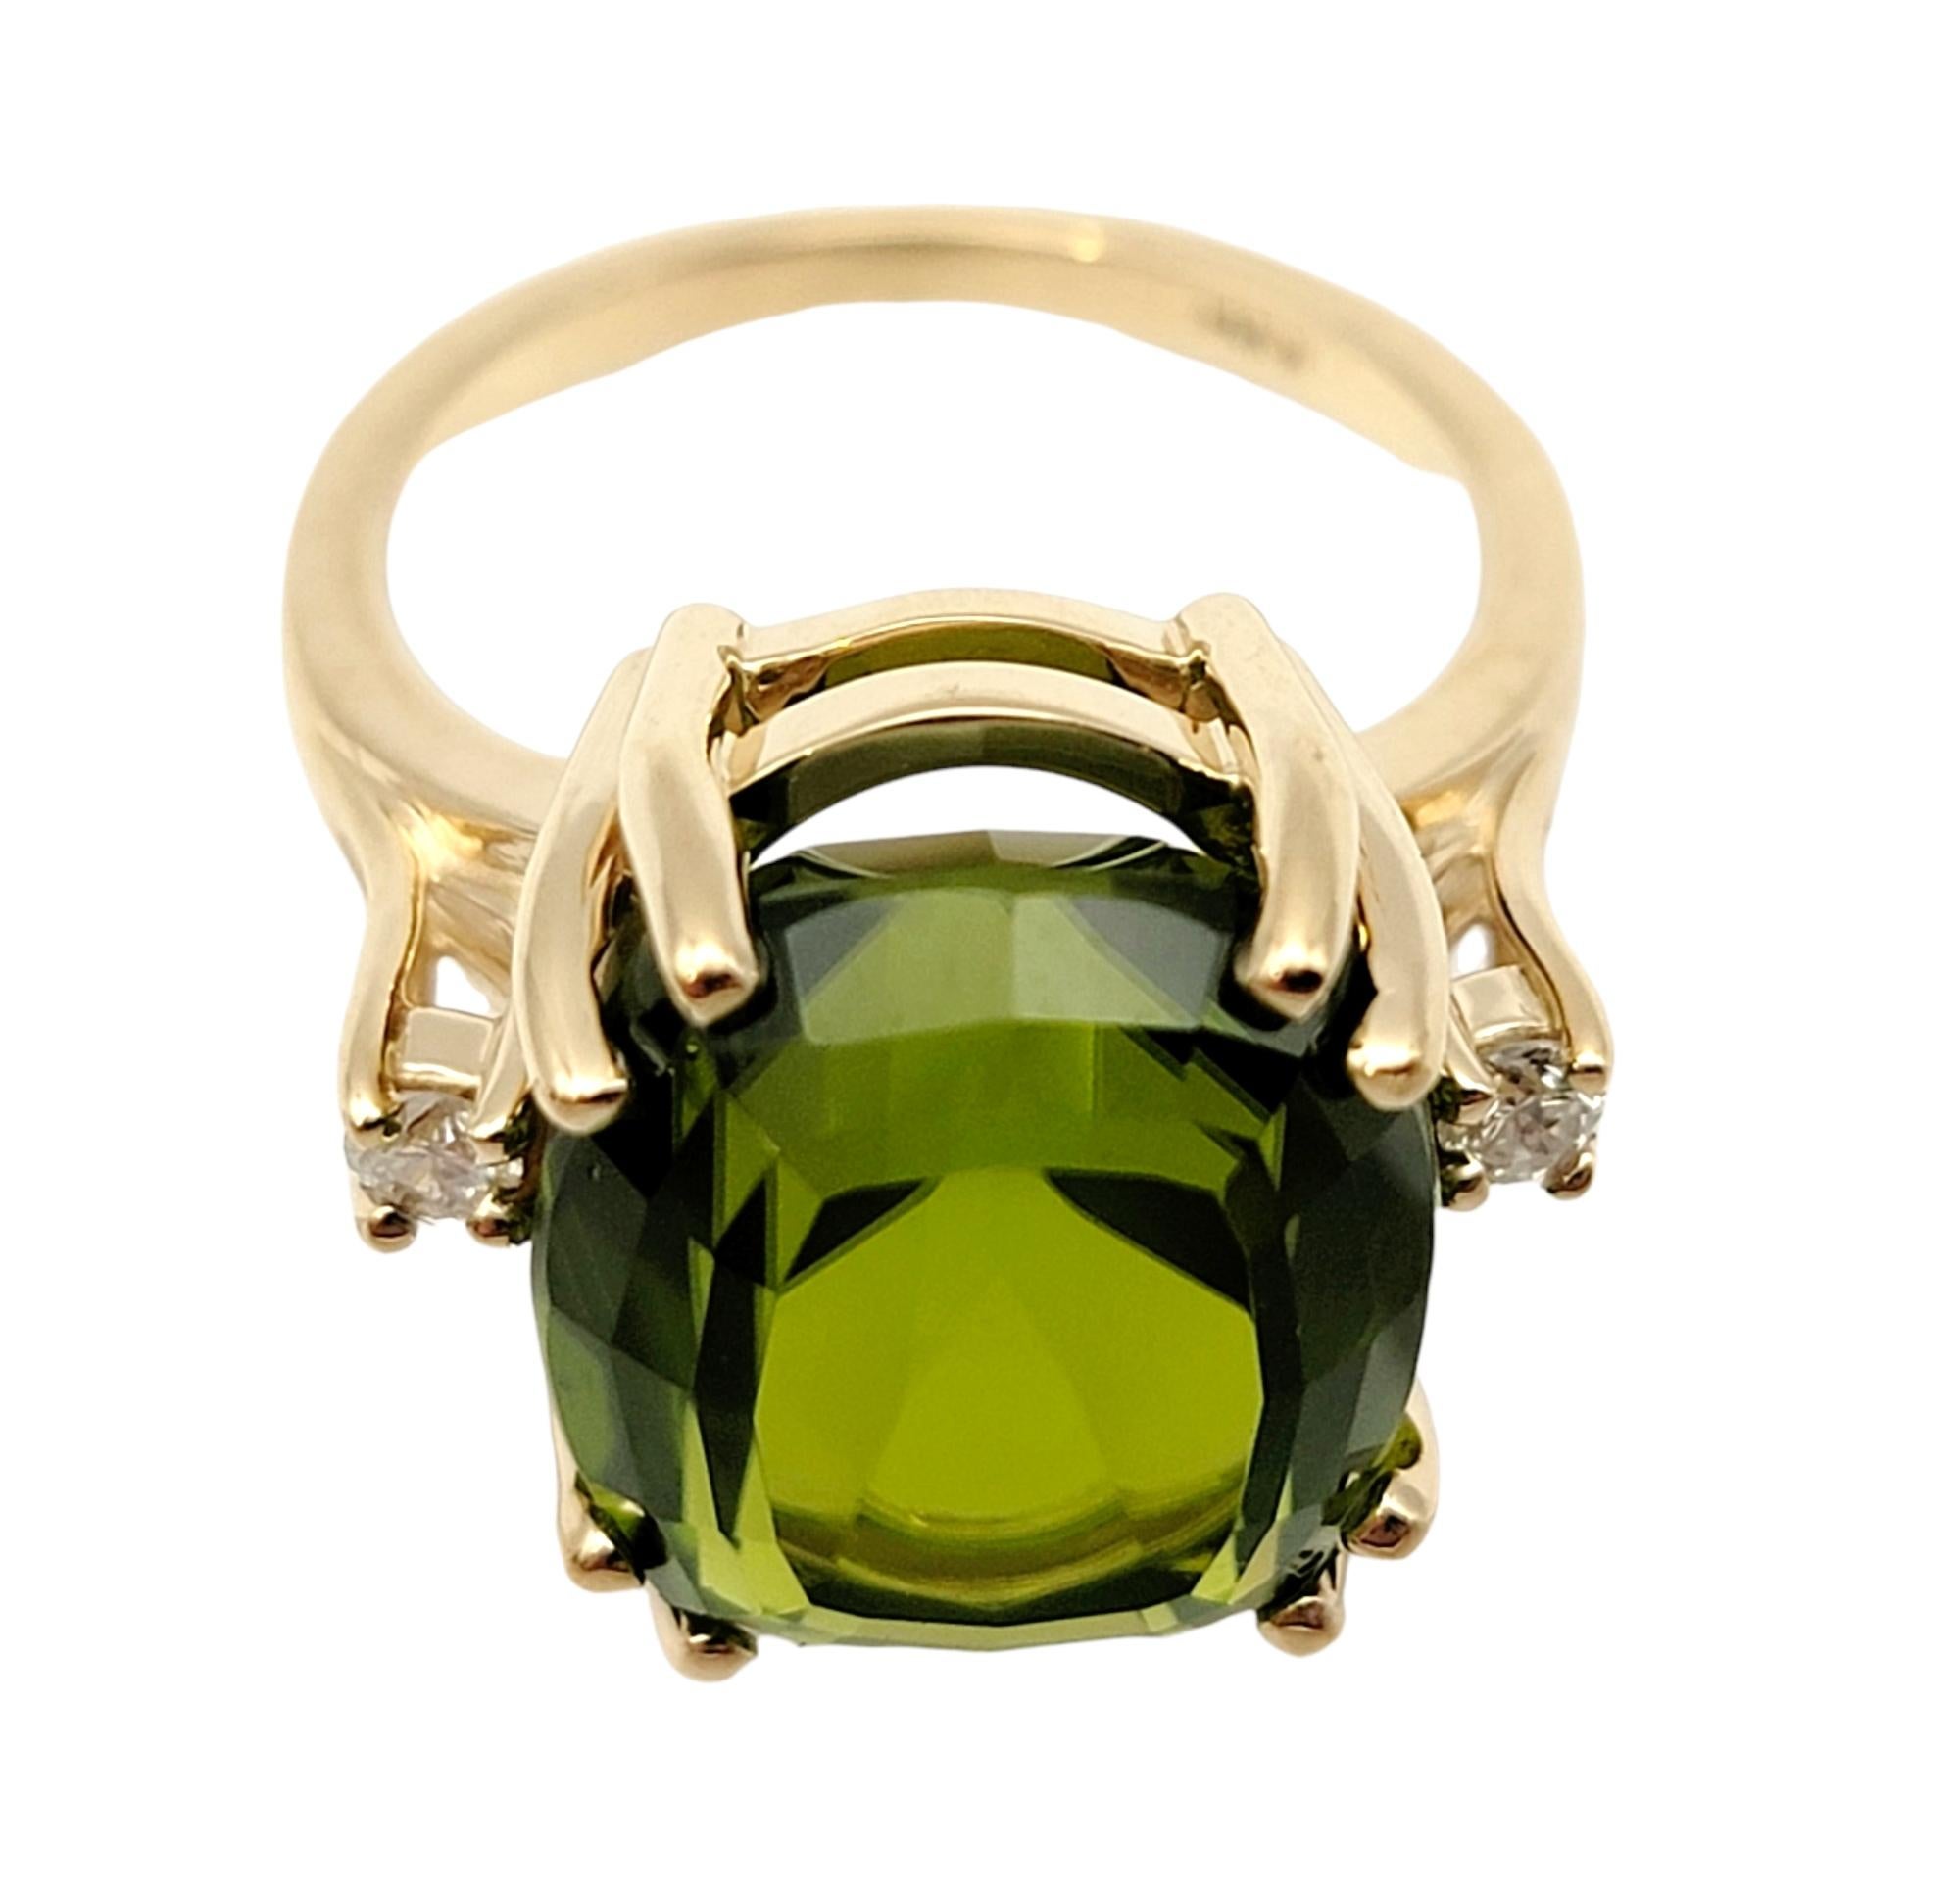 Contemporary Cushion Cut Peridot and Diamond Cocktail Ring in Yellow Gold 11.83 Carats Total  For Sale